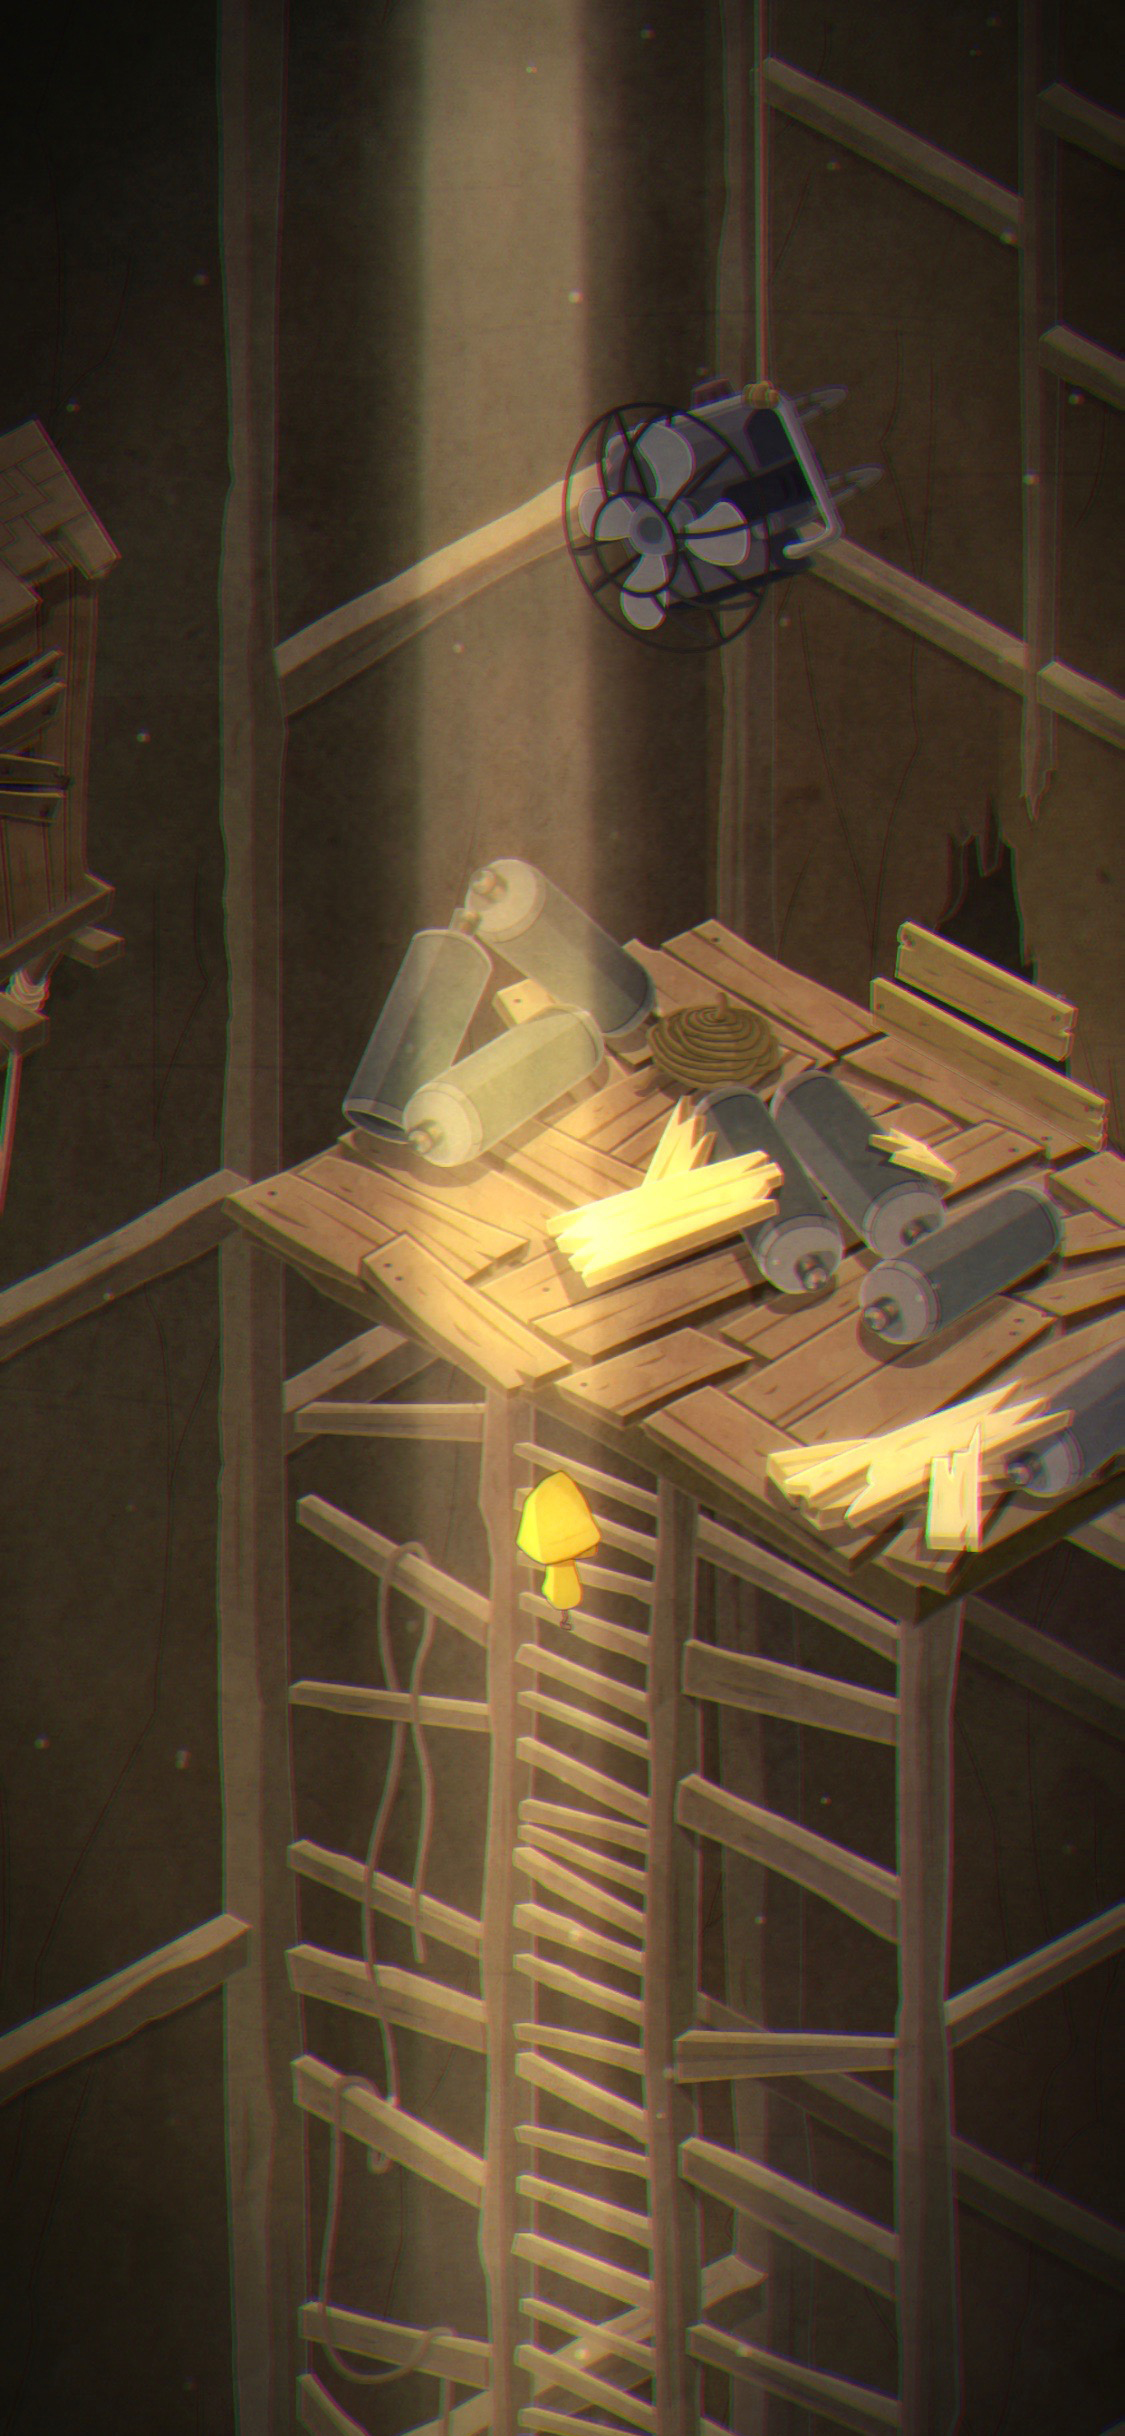 All Games Delta: Bandai Namco Announces Very Little Nightmares for iOS